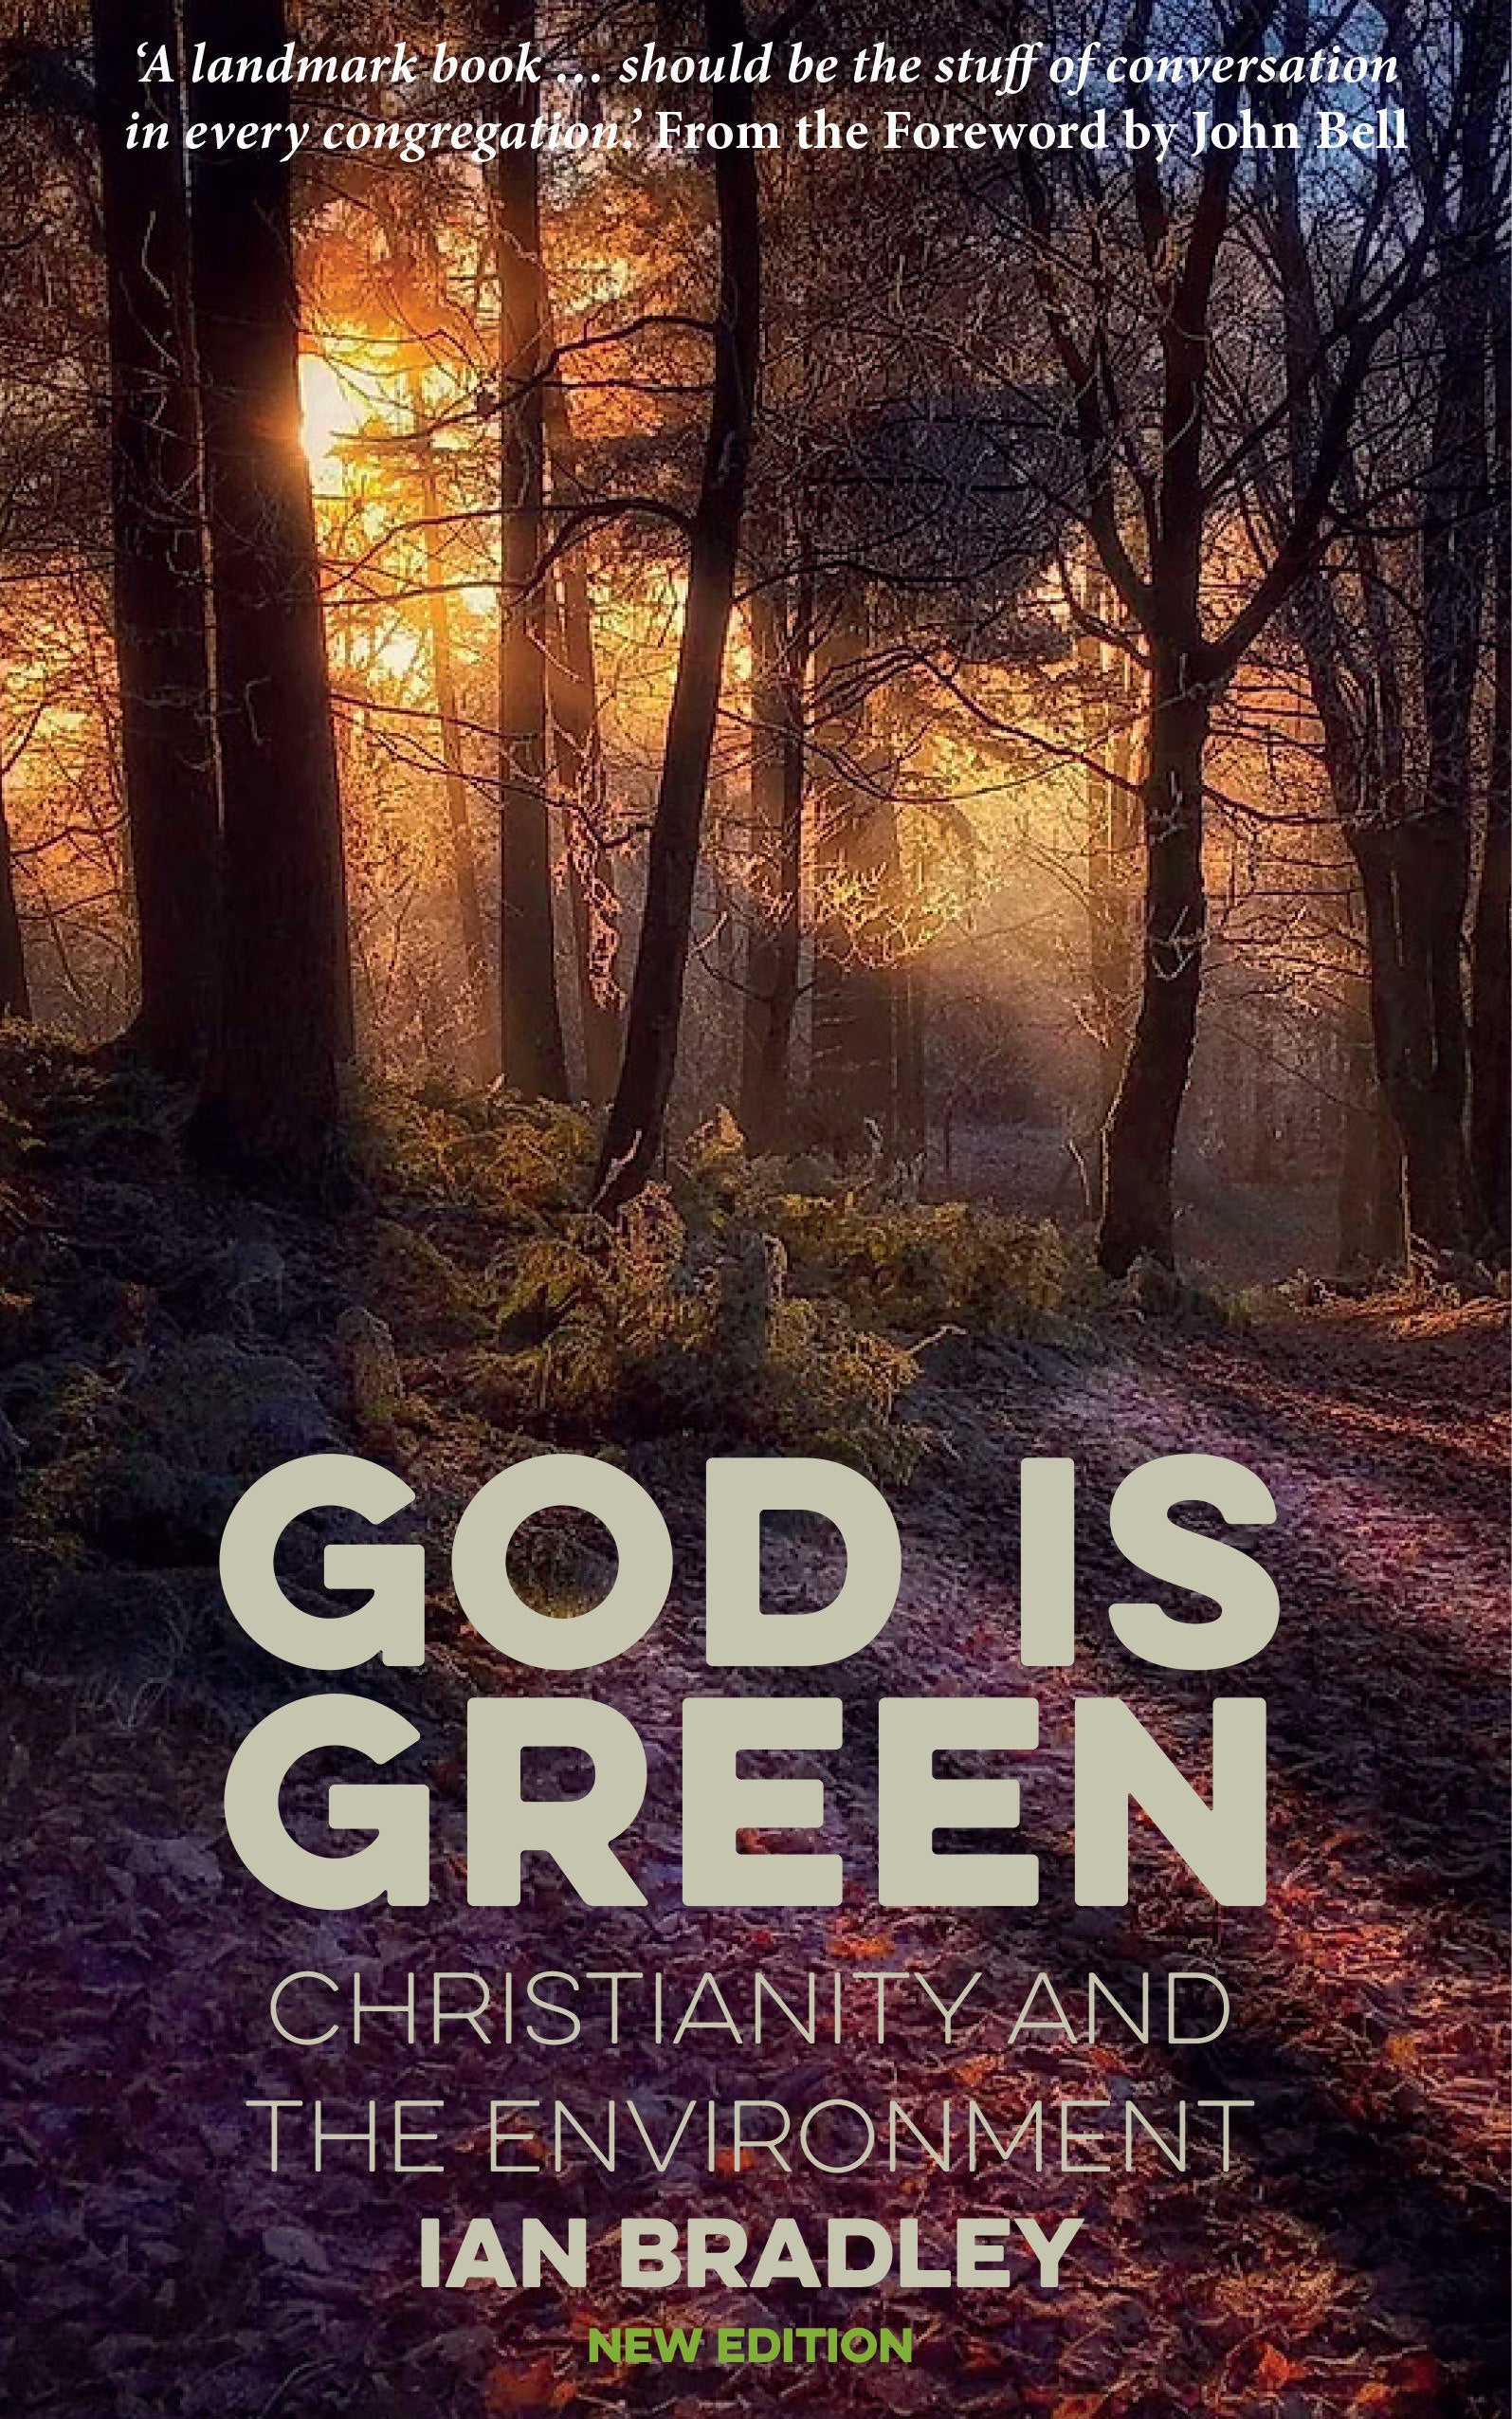 Image of God Is Green other